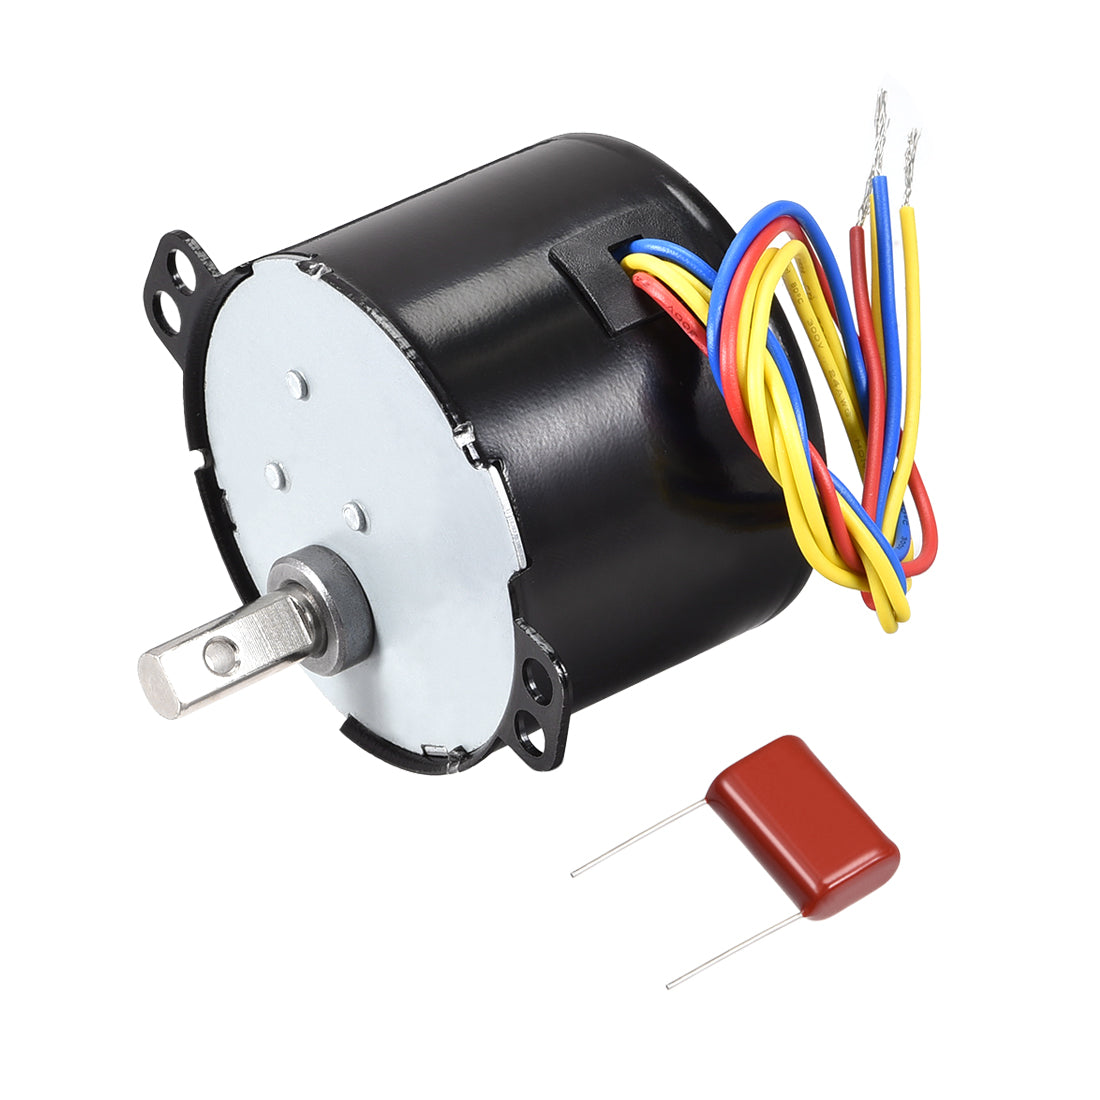 uxcell Uxcell AC220V Synchronous Motor Plastic Gear 20RPM 7mm Dia Eccentric Shaft with Hole